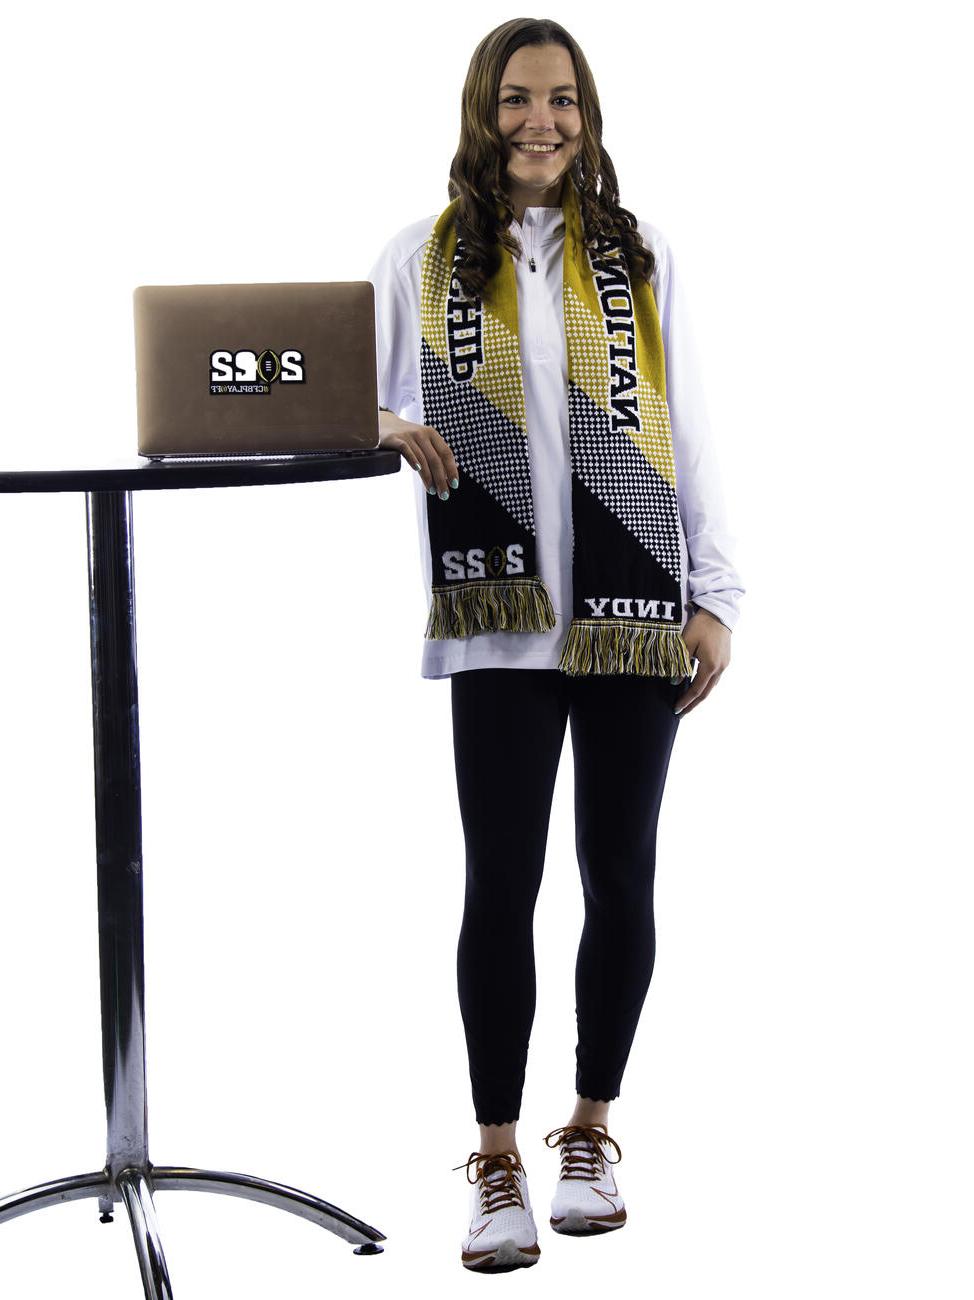 Kaylen Buschhorn poses by a table with a laptop.